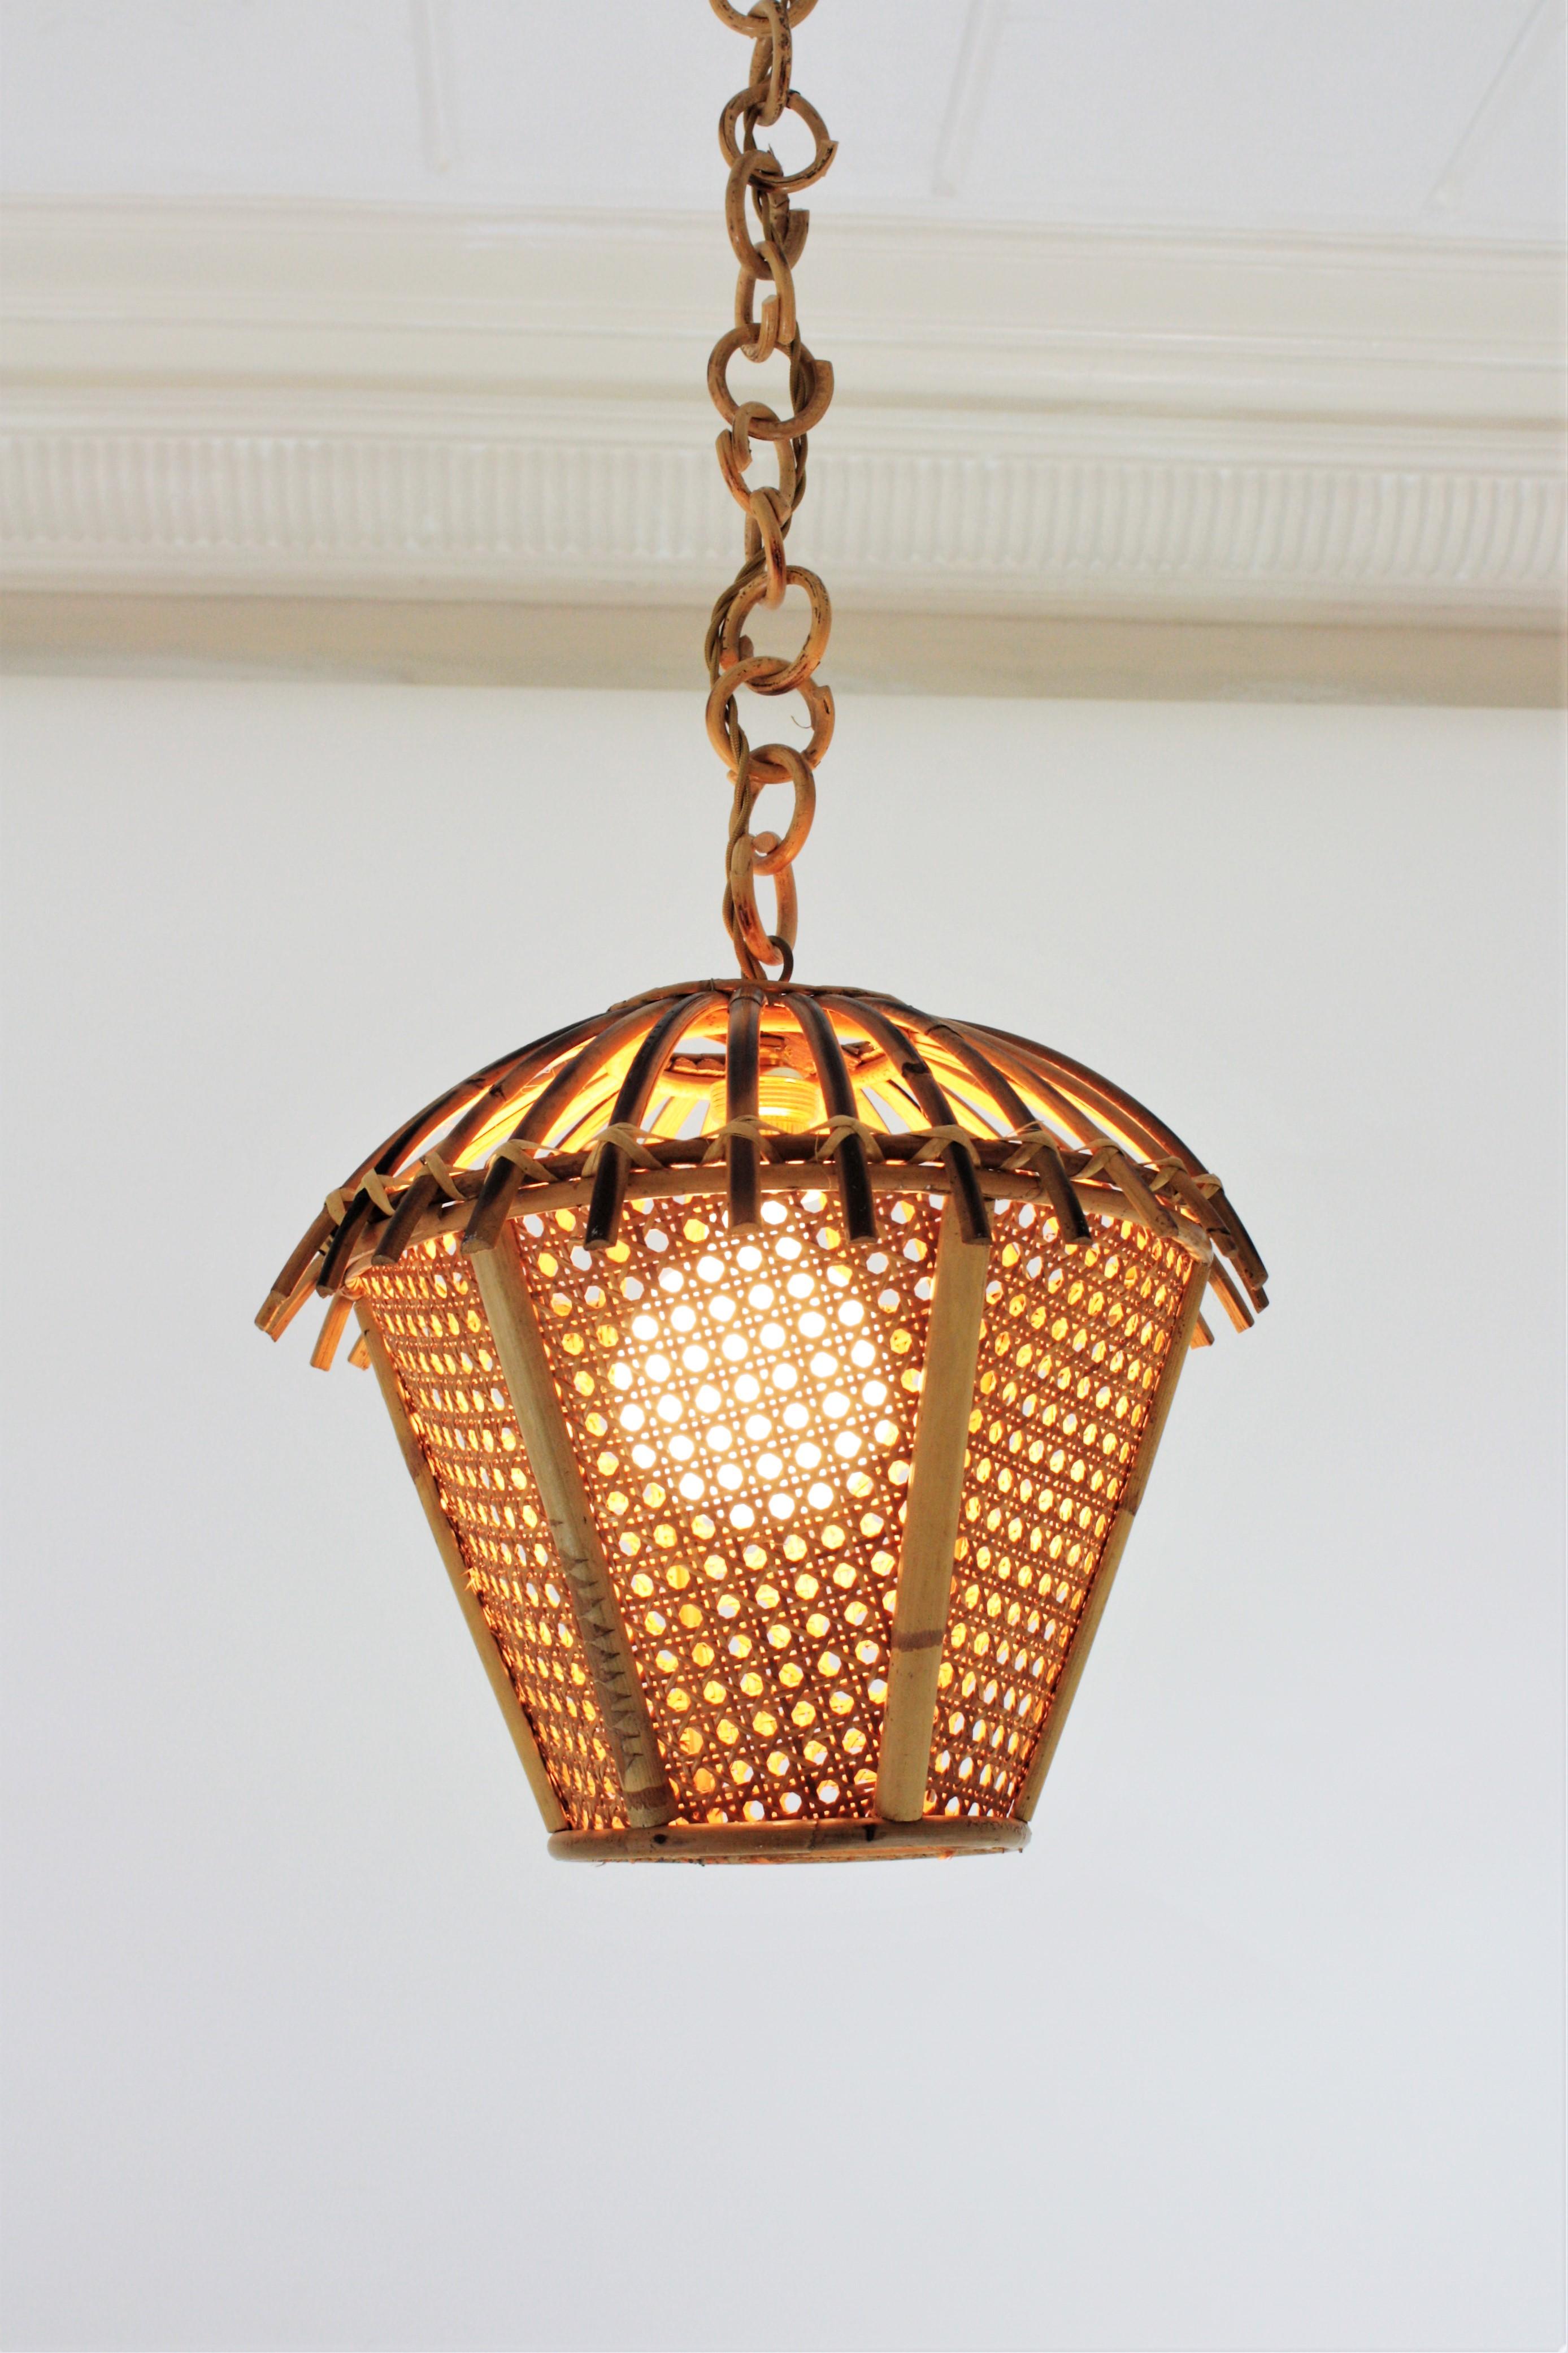 Italian Modernist Rattan and Wicker Wire Pagoda Pendant Hanging Light, 1960s For Sale 4